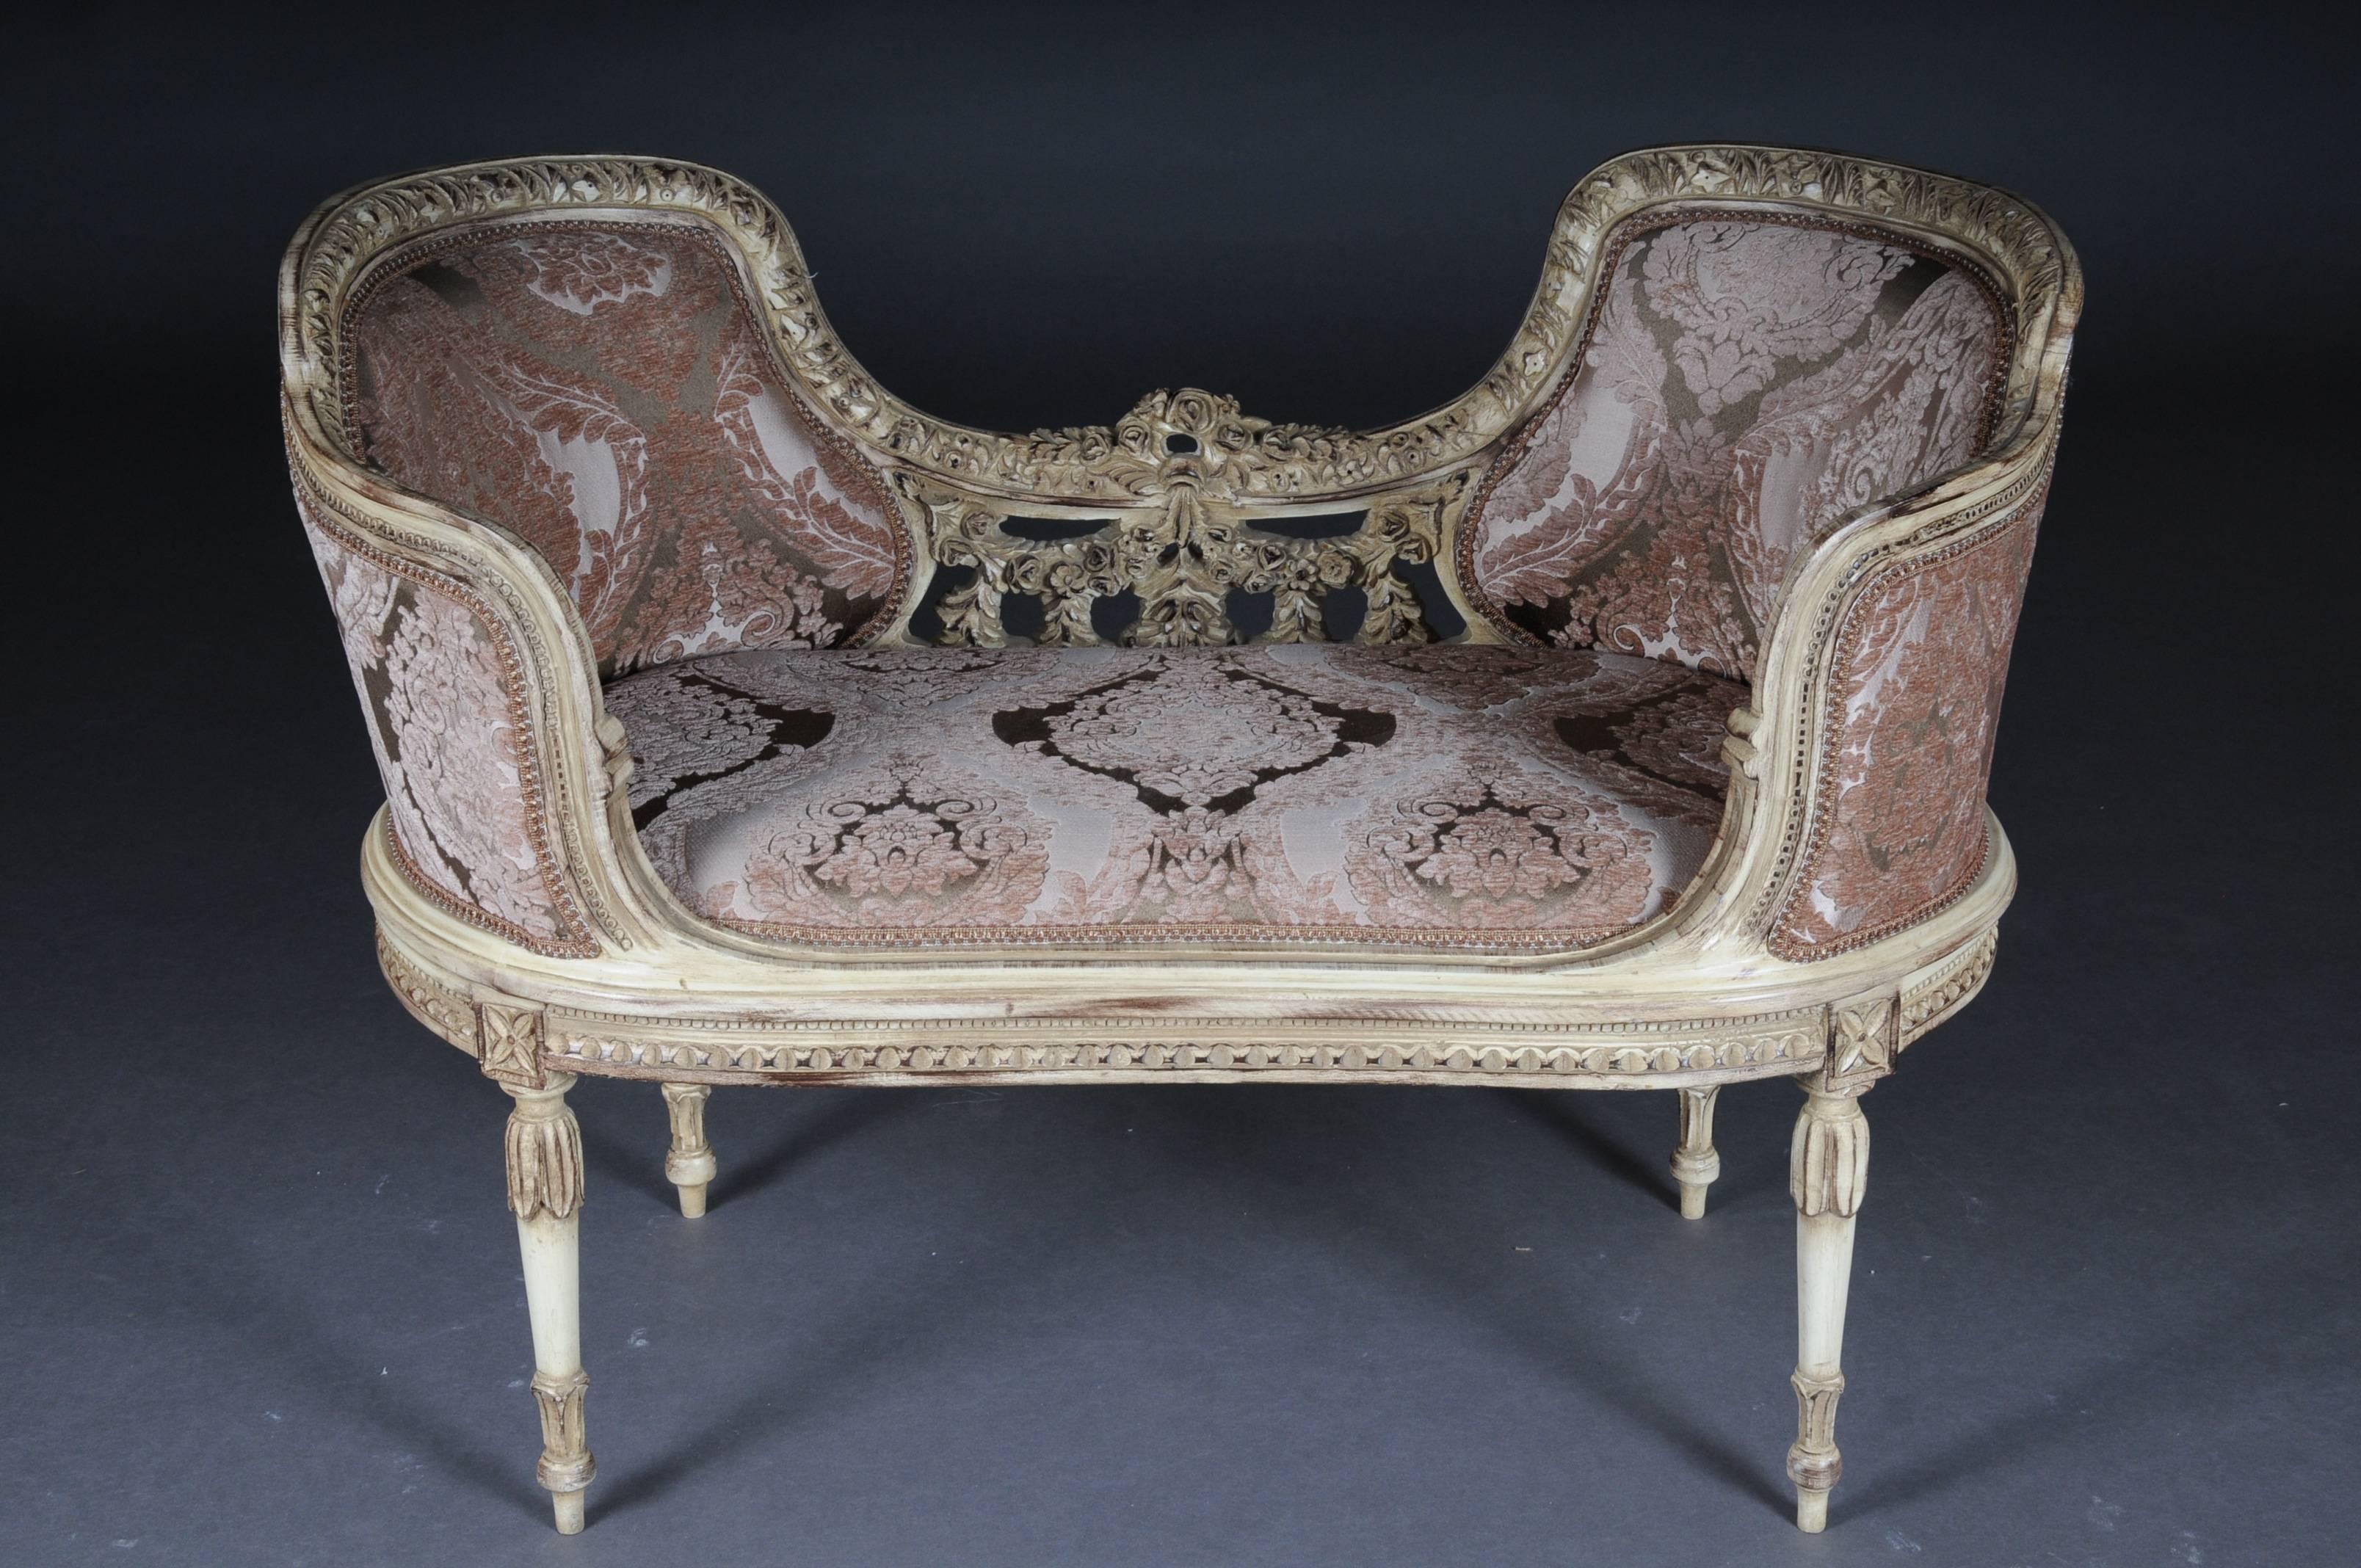 Solid beechwood, carved and gilt gilded. Semicircular rising, curved backrest framing with rocaille crowning. Appropriately curved frame with rich carved foliage. Profiled frame on conical, fluted legs. Seat and backrest are finished with a